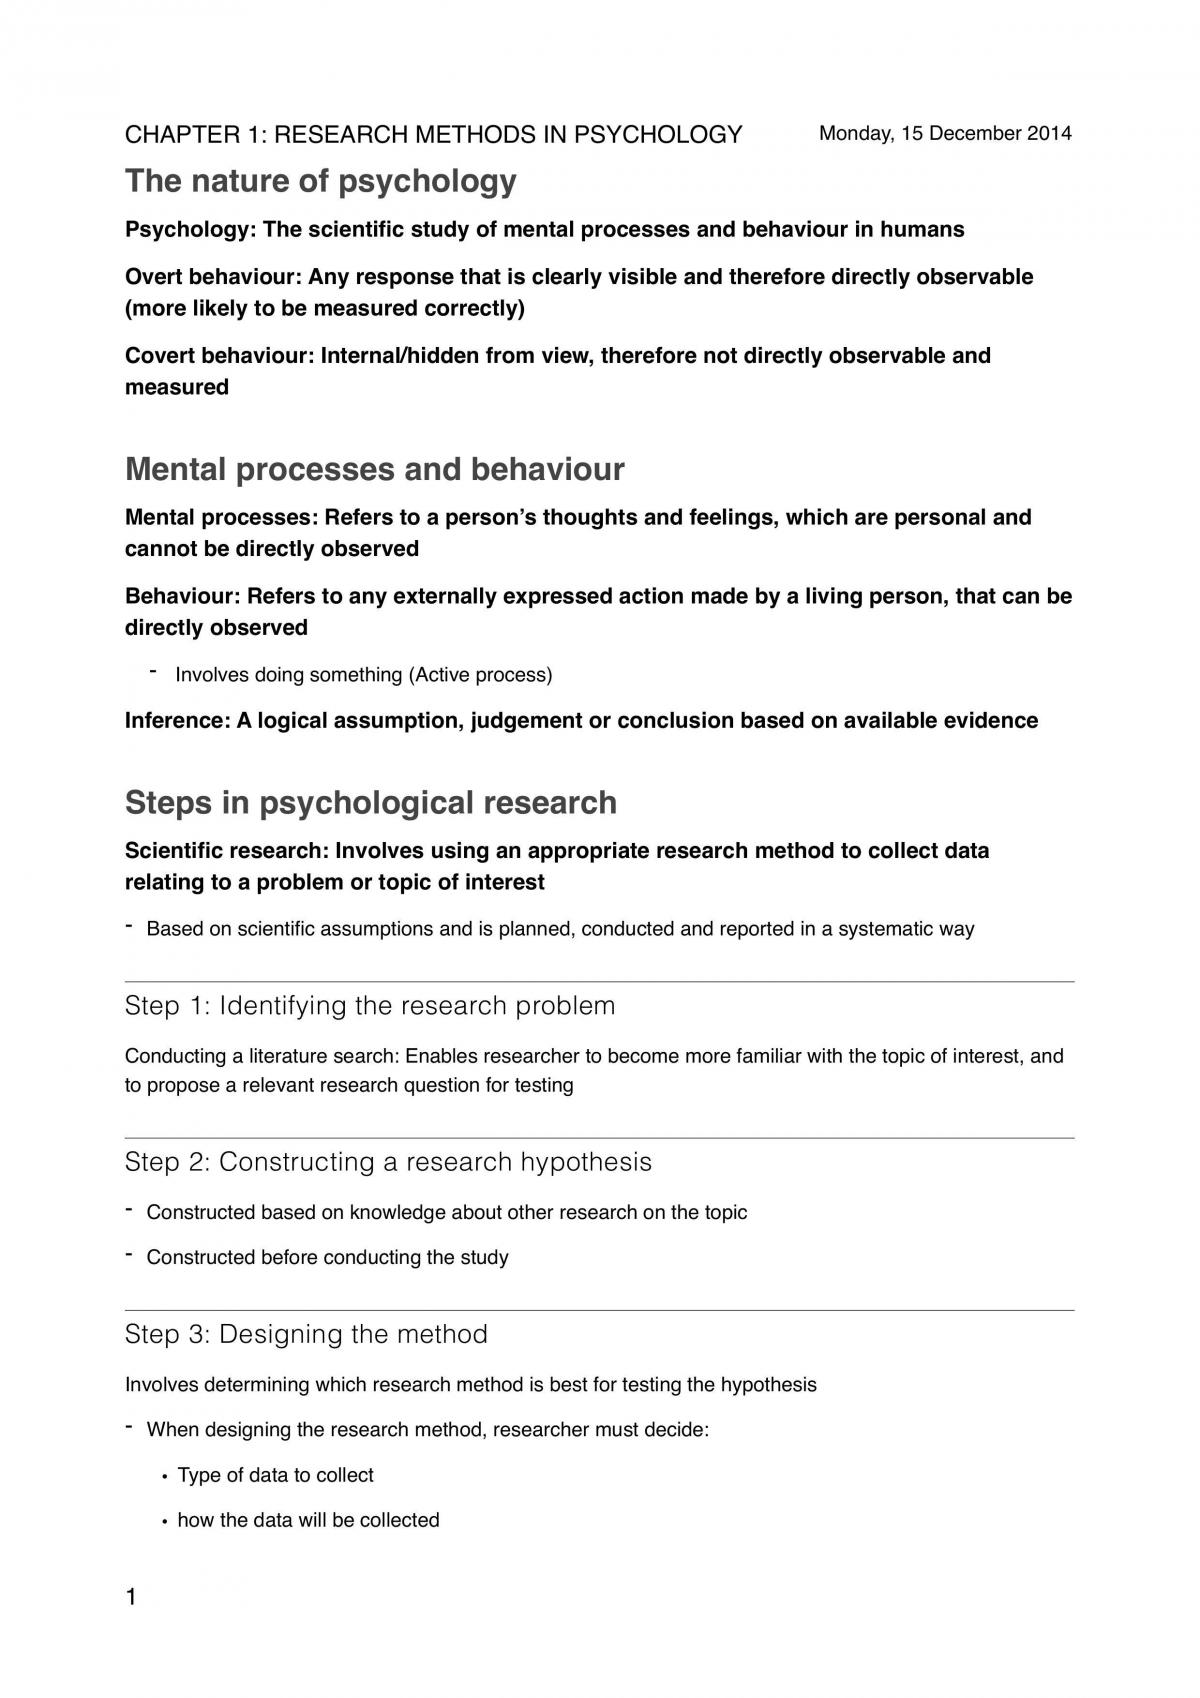 research methods in psychology chapter 3 quizlet